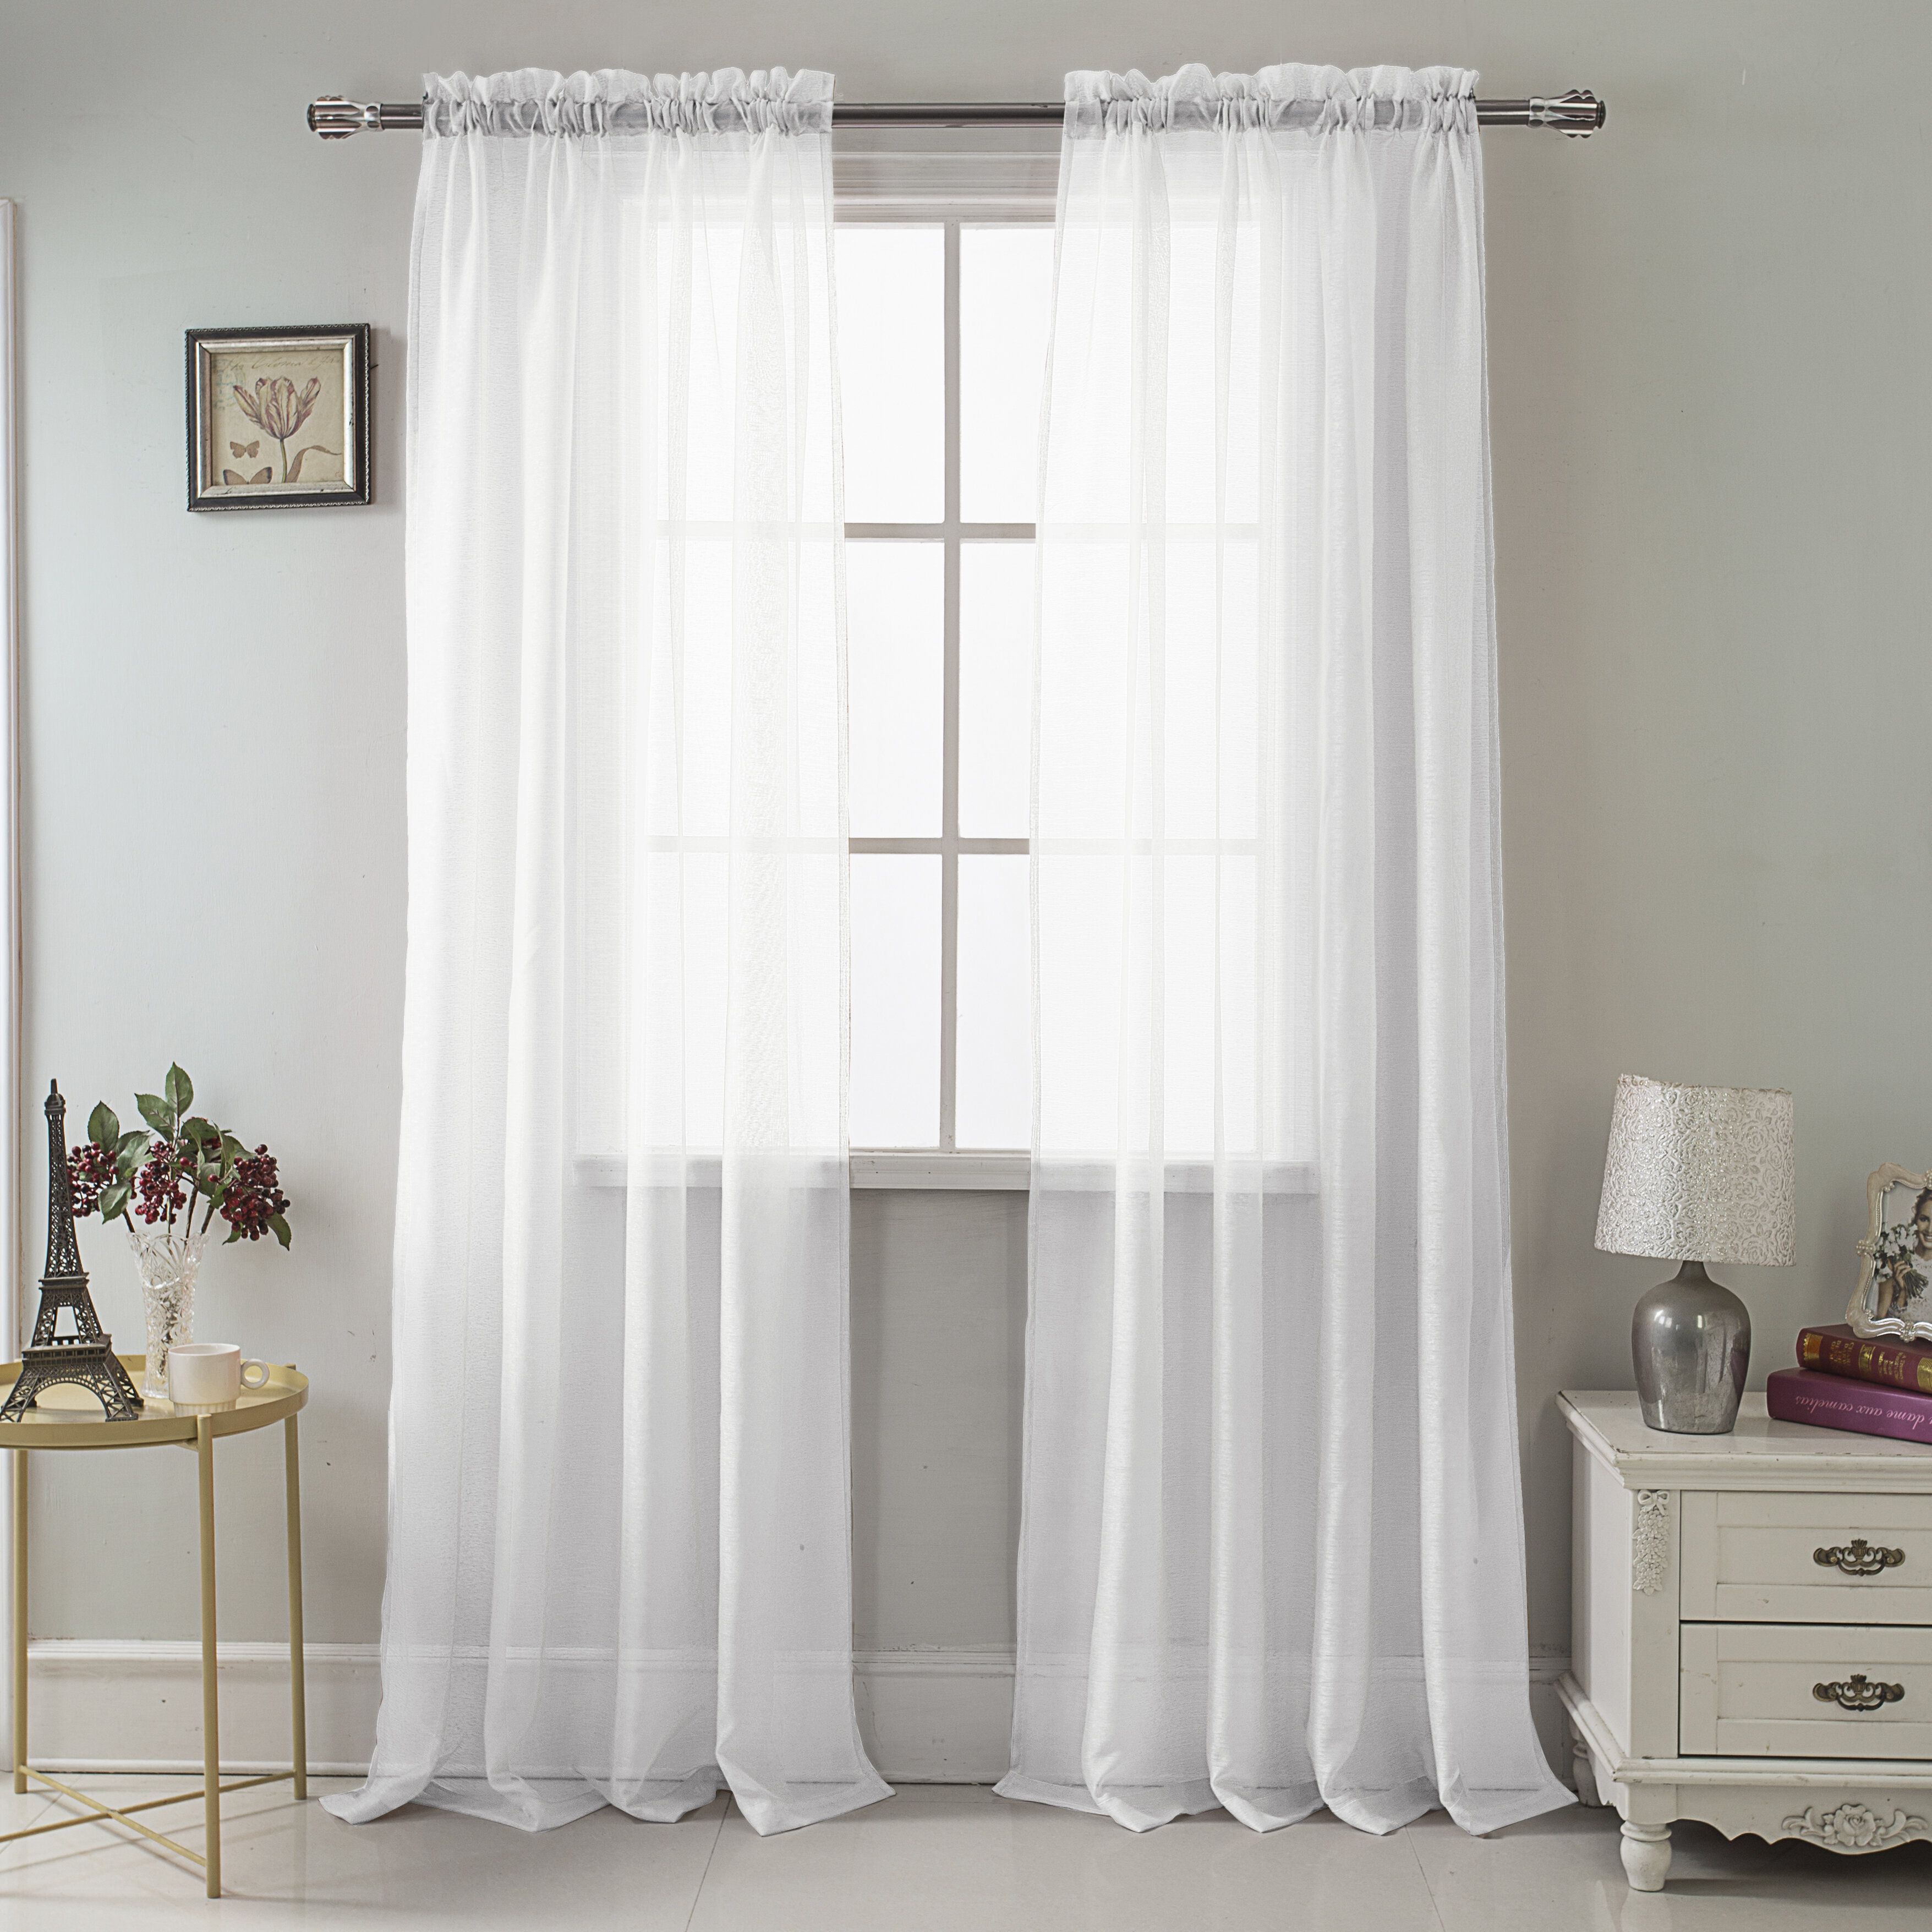 20 Ideas of Arm and Hammer Curtains Fresh Odor-neutralizing Single ...